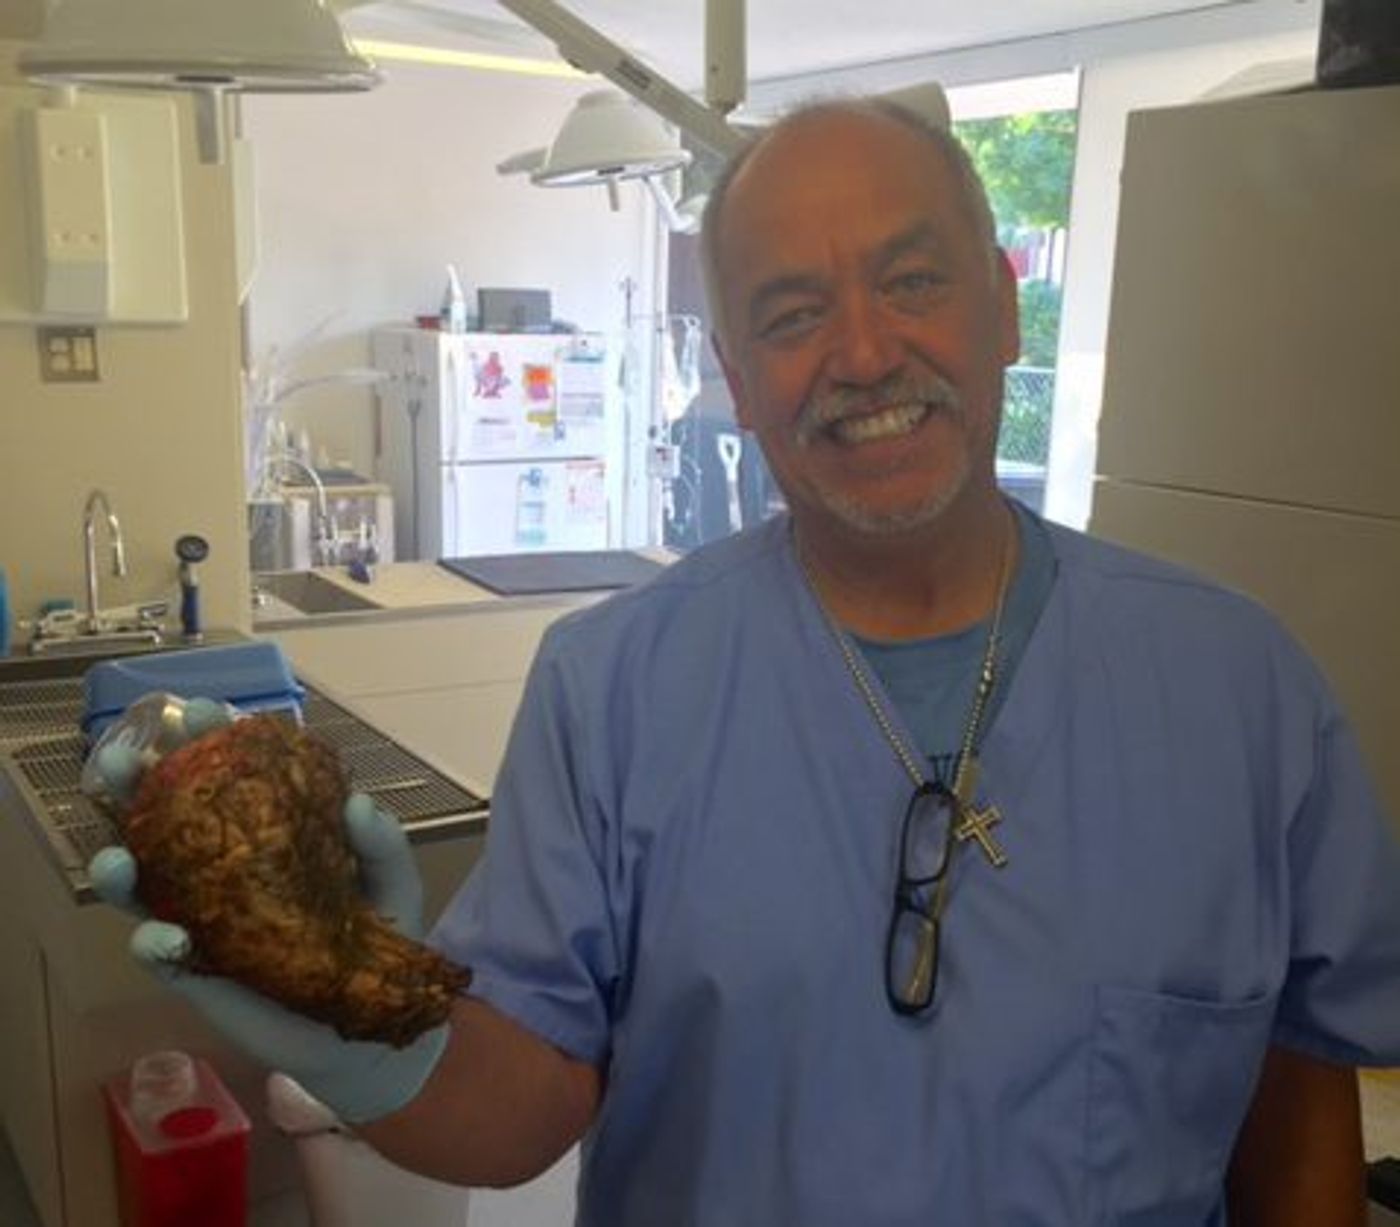 Dr. Baez, who performed the surgery, holds the mold of the dog's stomach.